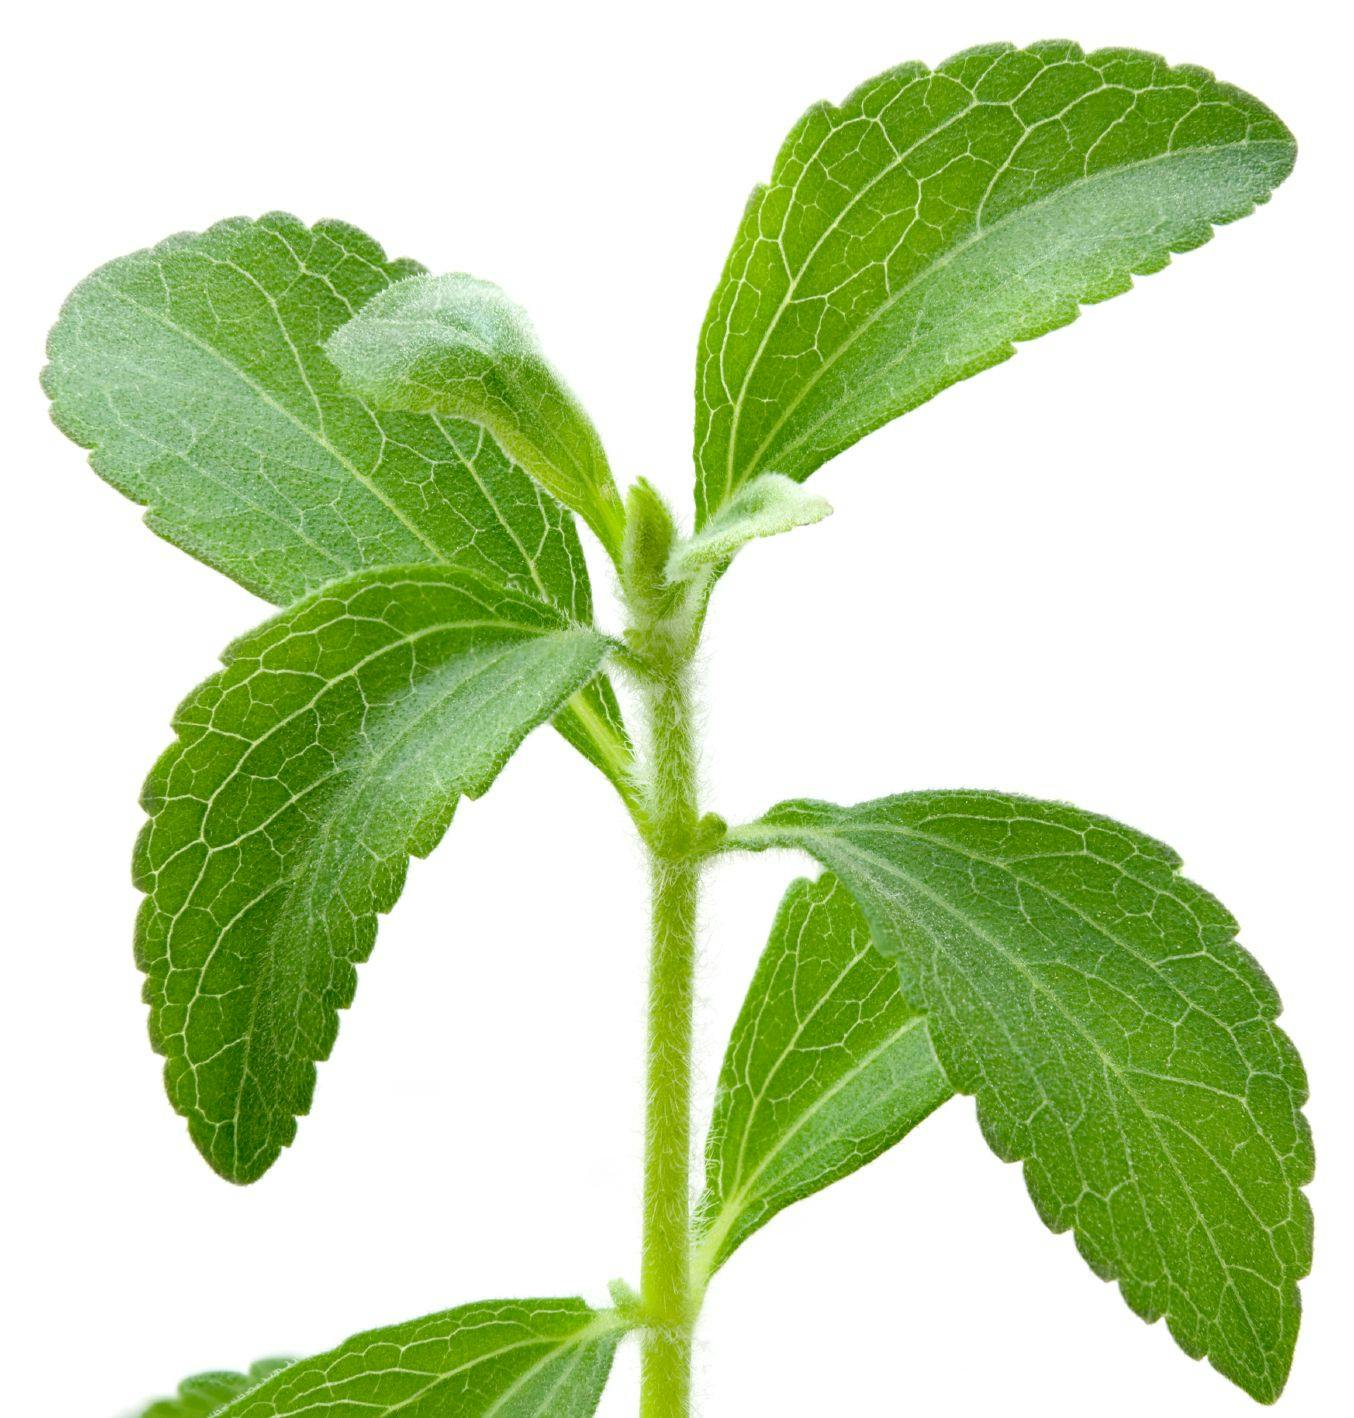 Why Is Organic Stevia So Difficult to Achieve?